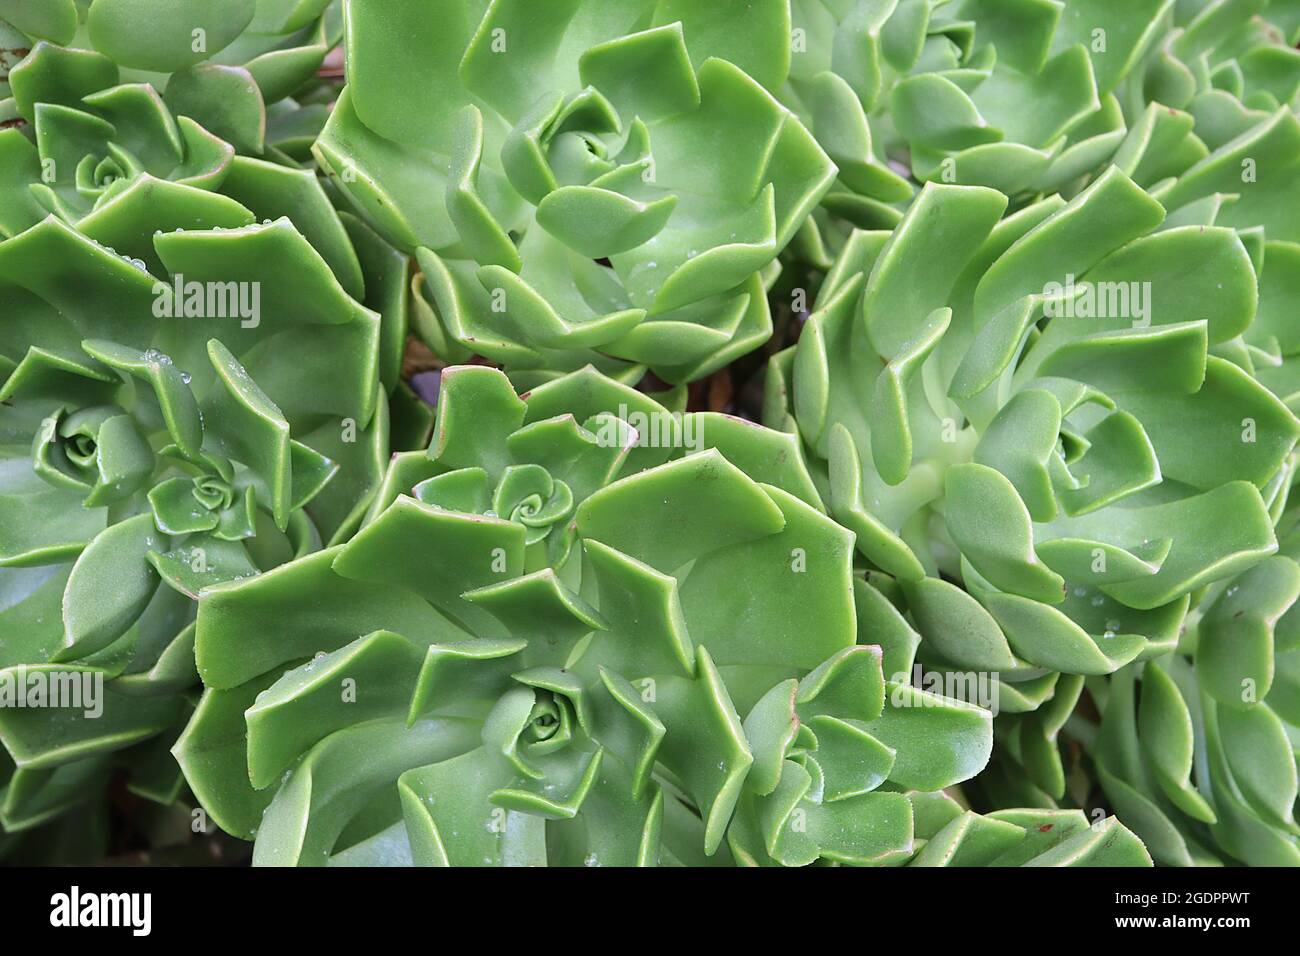 Aeonium volkeri rosette clusters of pointed incurved spoon-shaped fresh green leaves, July, England, UK Stock Photo